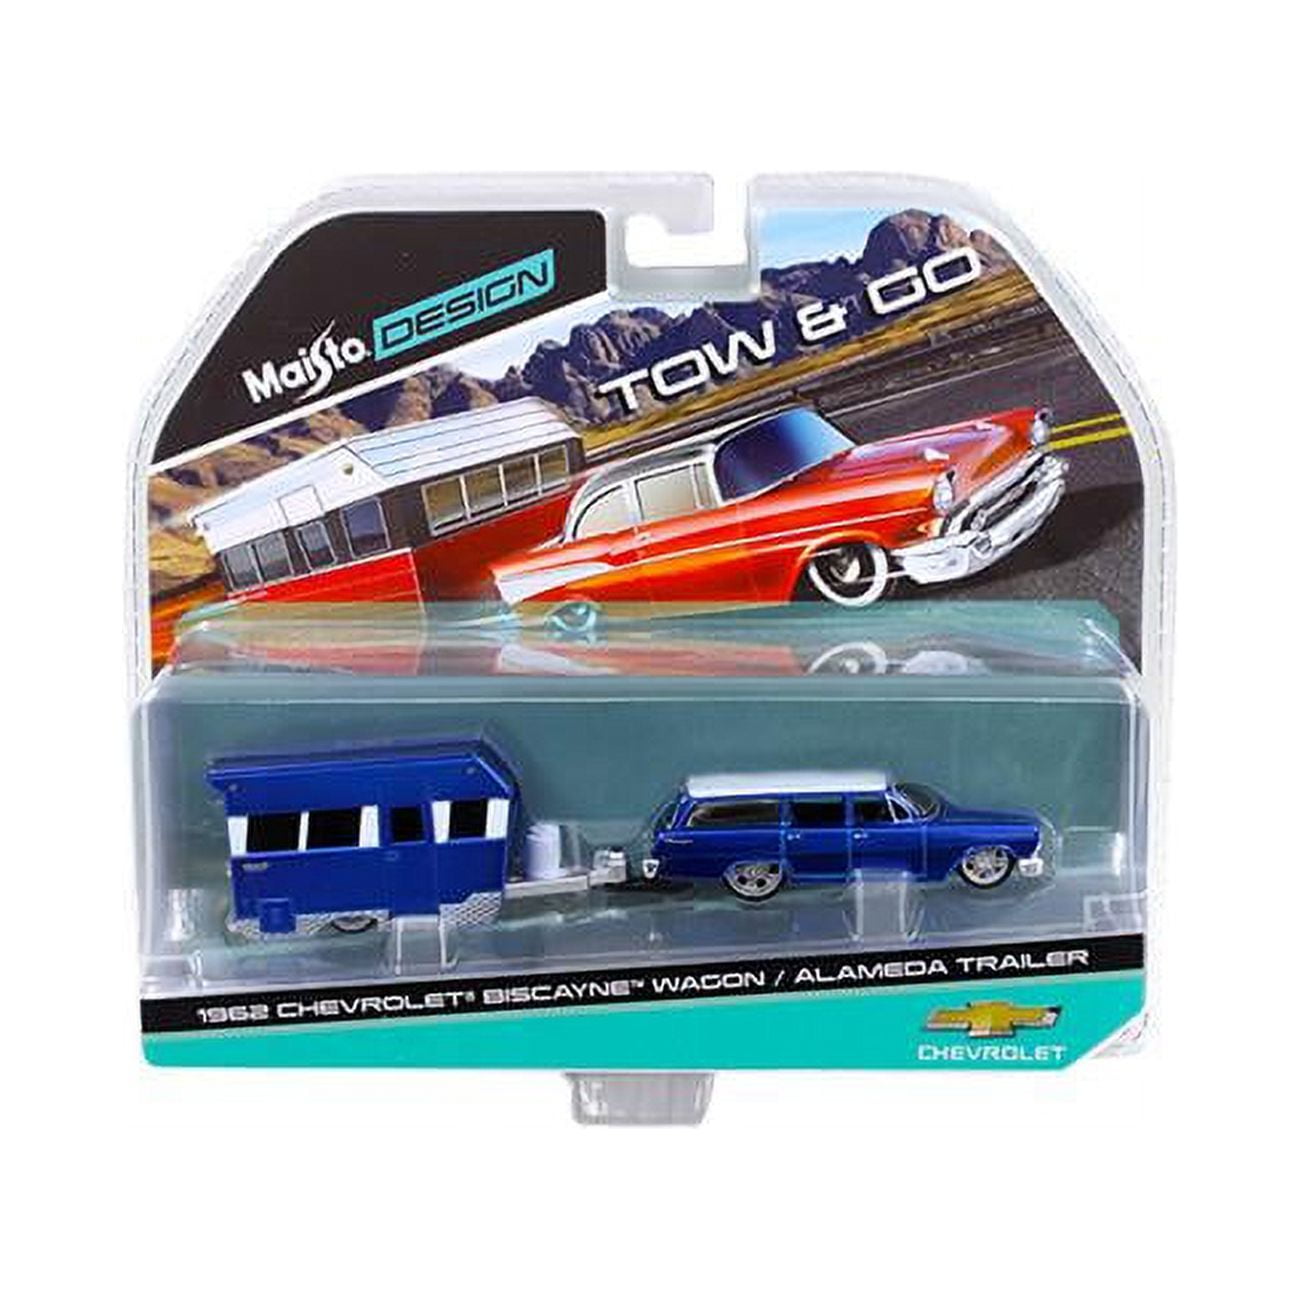 Maisto 15368a 1 By 64 Diecast 1962 Chevrolet Biscayne Wagon With Alameda Trailer Blue Tow & Go Model